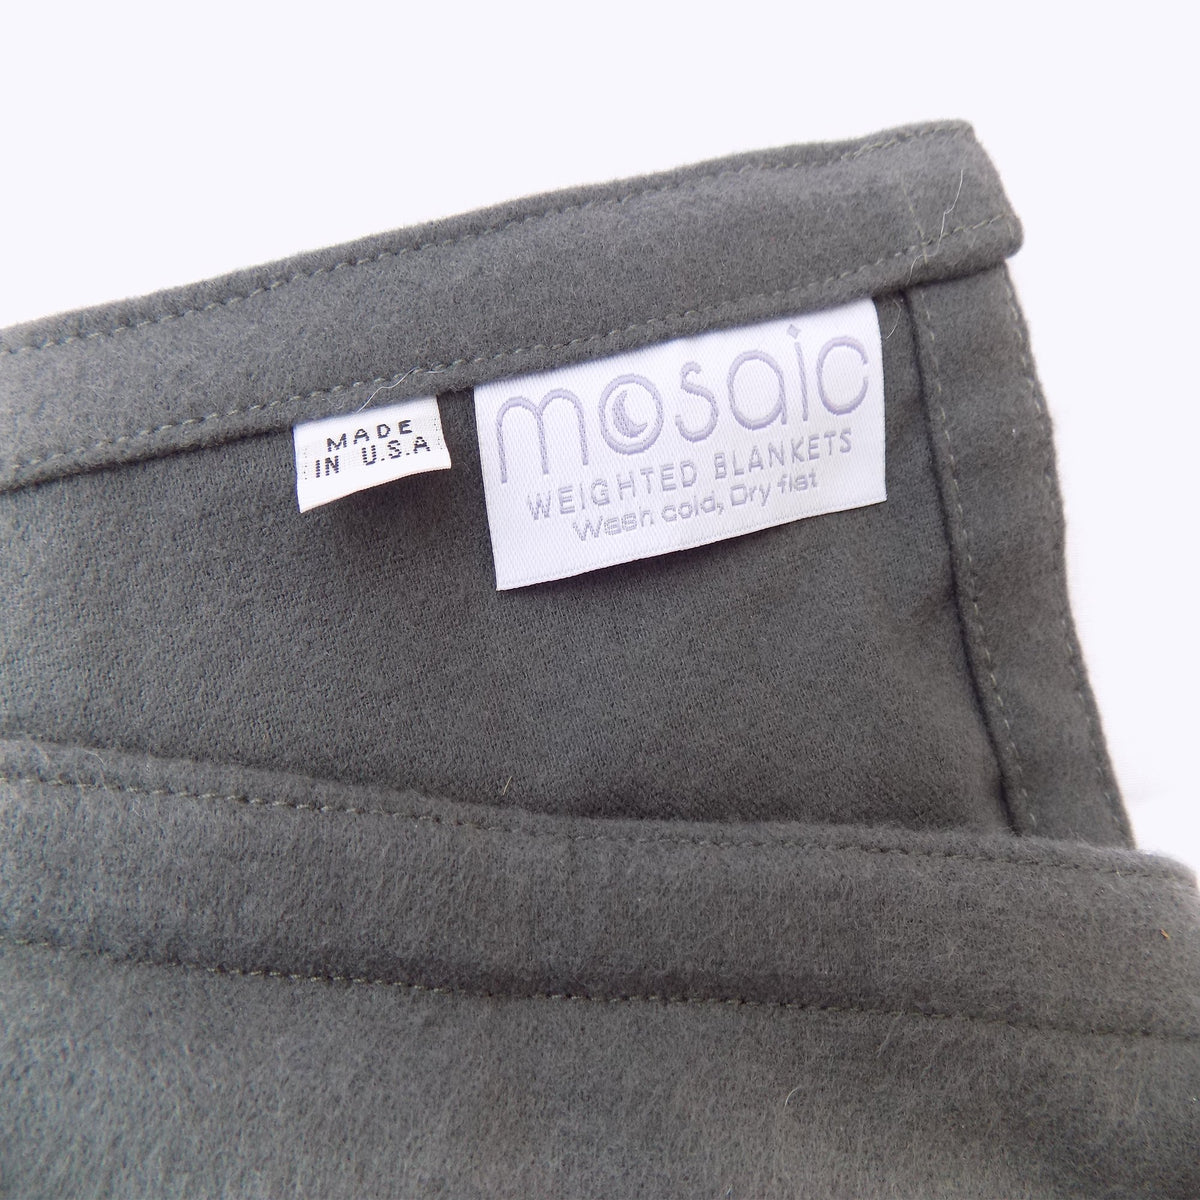 Made in America tag for the Mosaic Weighted Blankets Comfortable Grey Flannel